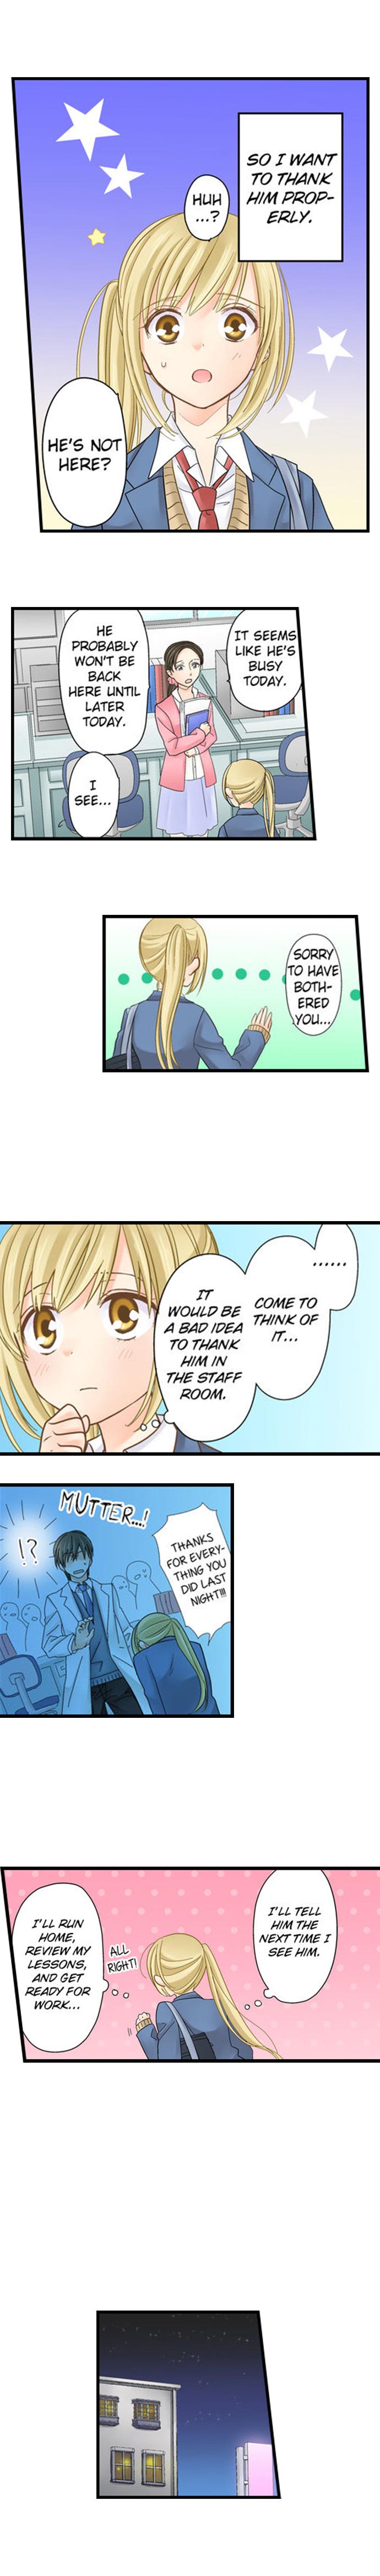 Running a Love Hotel with My Math Teacher - Chapter 12 Page 5